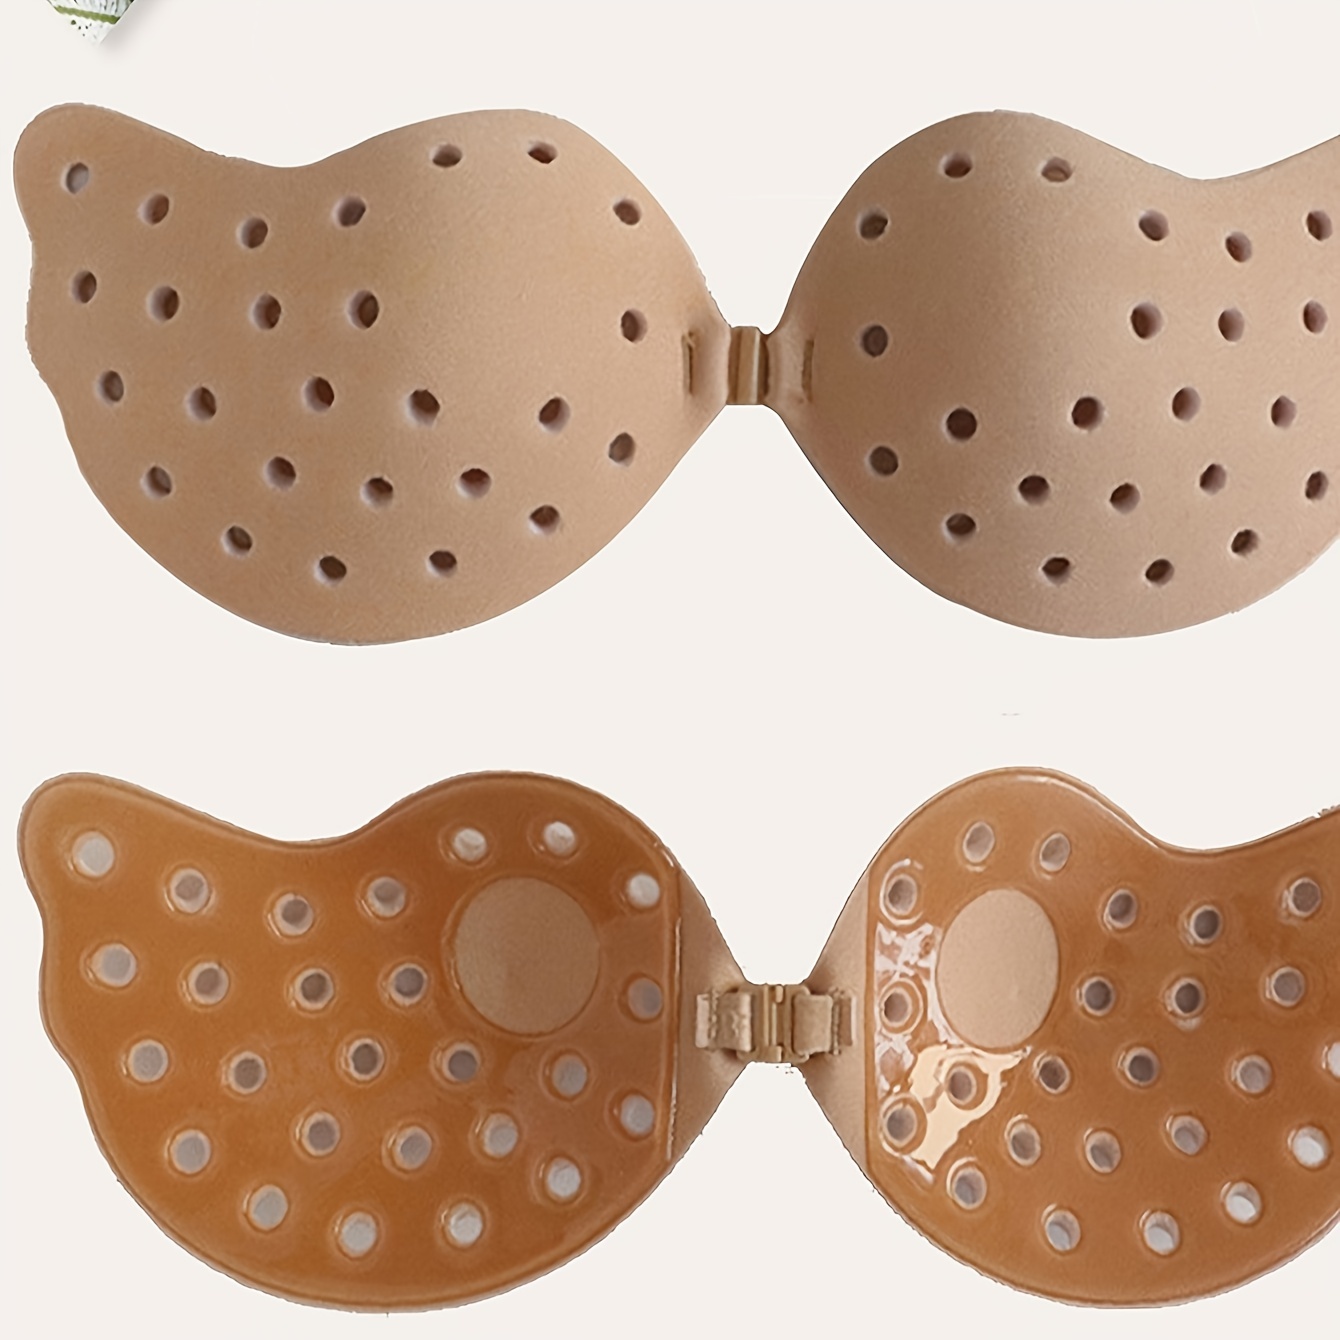  ENVY BODY SHOP Peel and Stick On Reusable Foam Bra Cup